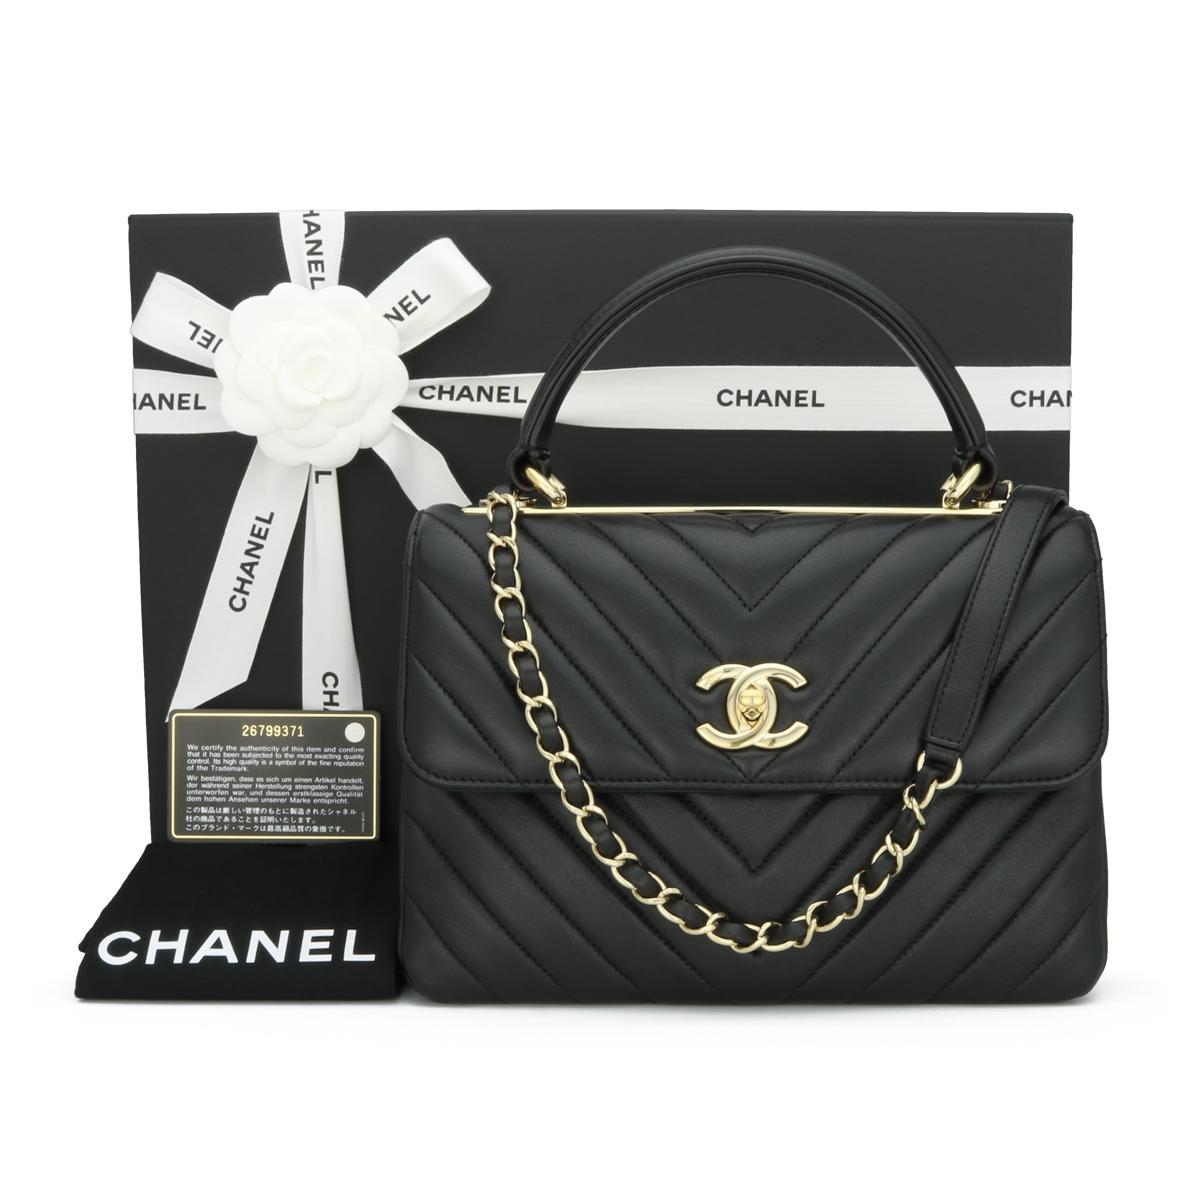 CHANEL Trendy CC Top Handle Chevron Bag Small Black Lambskin with Light Gold-Tone Hardware 2019 – 19C.

This stunning bag is in very good condition, the bag still holds its shape very well, and the hardware is still very shiny.

This top handle bag